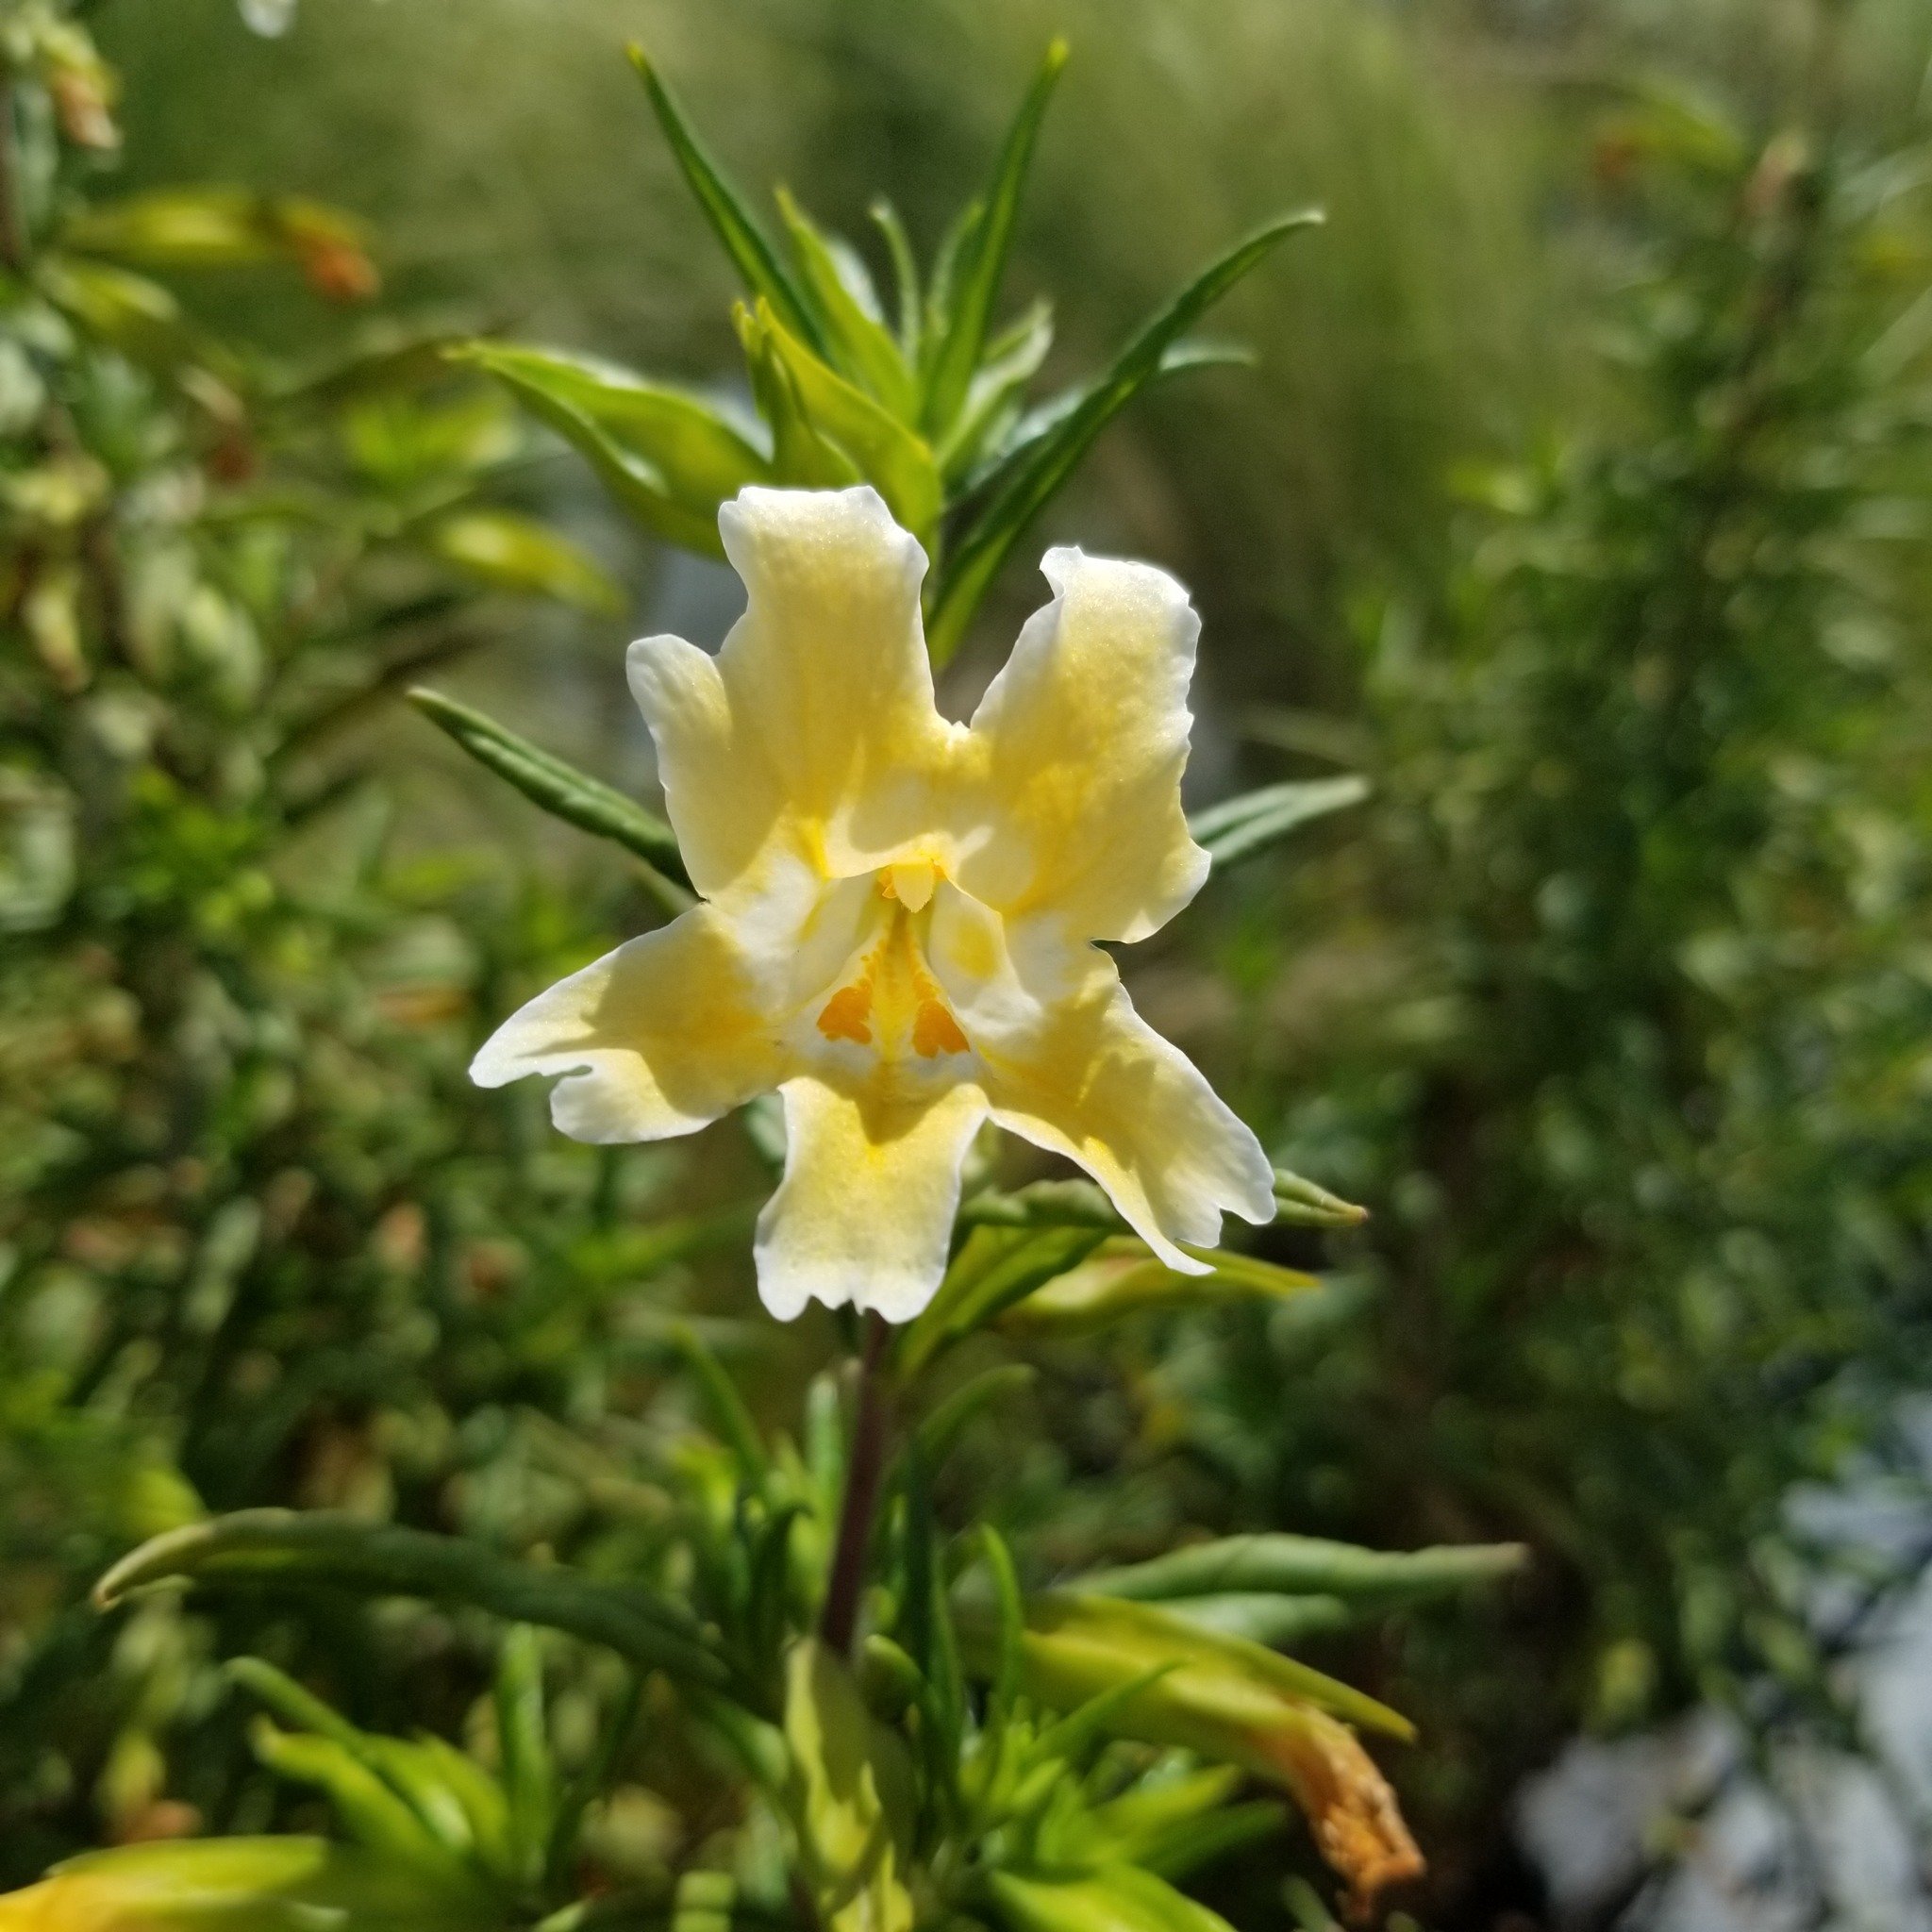 Mimulus (Diplacus), aka Monkeyflower, are a familiar sight alongside California's roadways and in its natural ecosystems - some are even found in bogs, such as Erythranthe cardinalis (Scarlet Monkeyflower). 🌼  But did you know there are over 145 dif